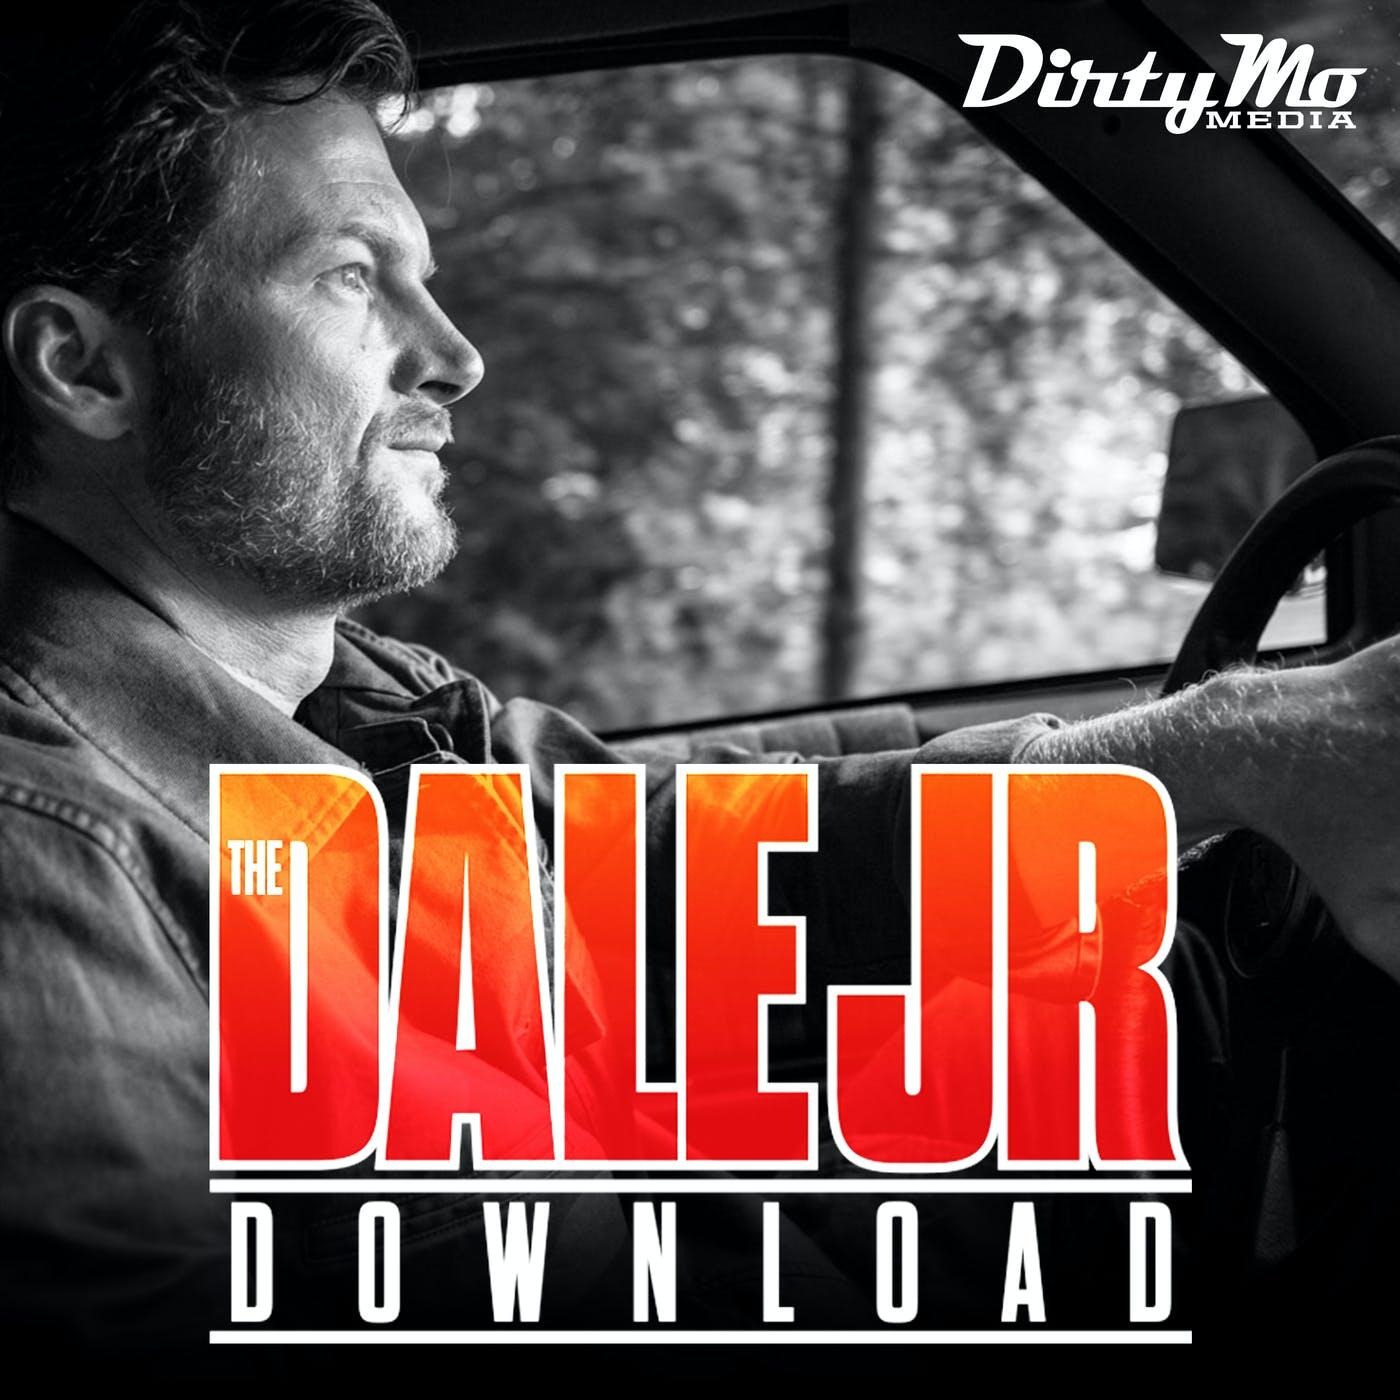 How To Watch Dale Jr Download